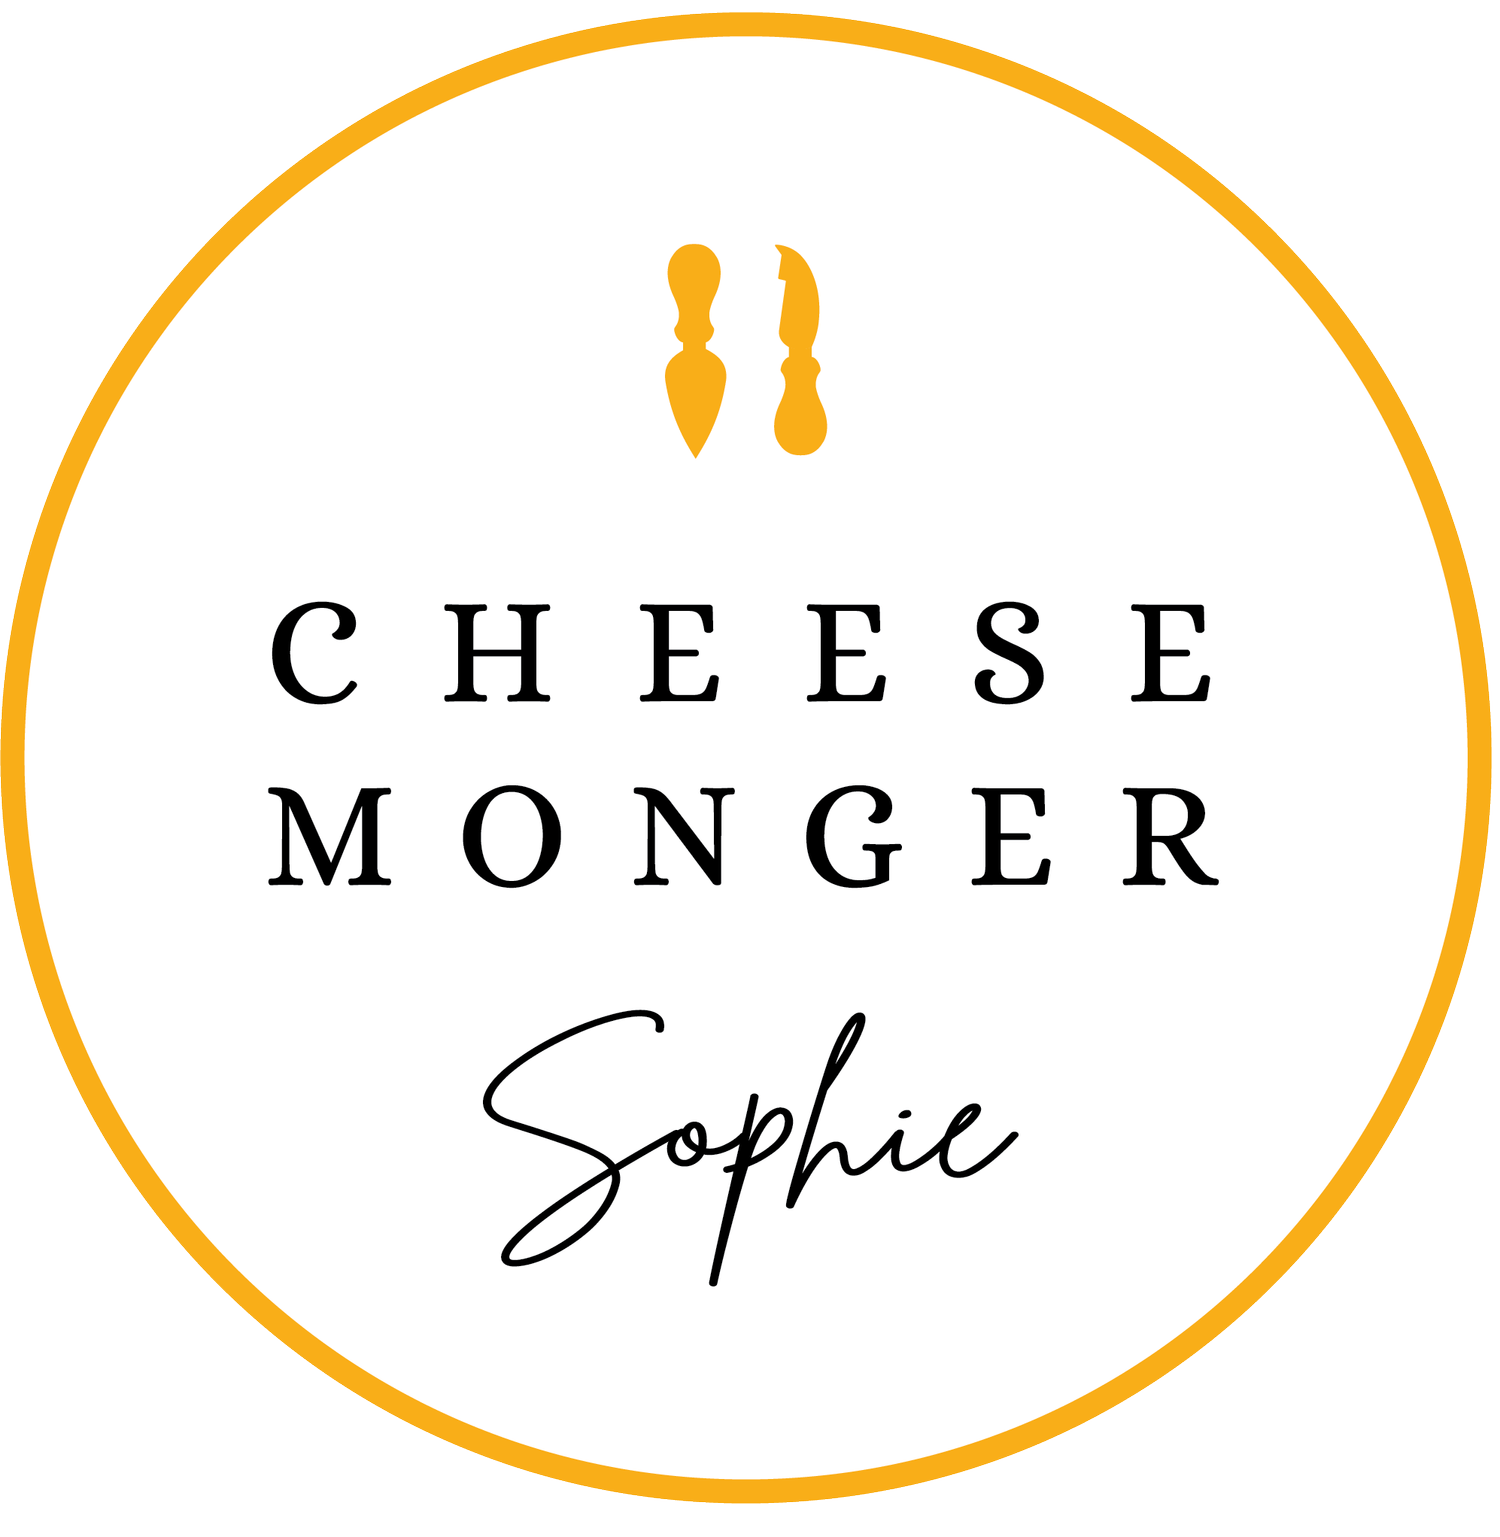 Online home of cheese monger Sophie, specialist cheese shop in Healesville, Victoria, Australia